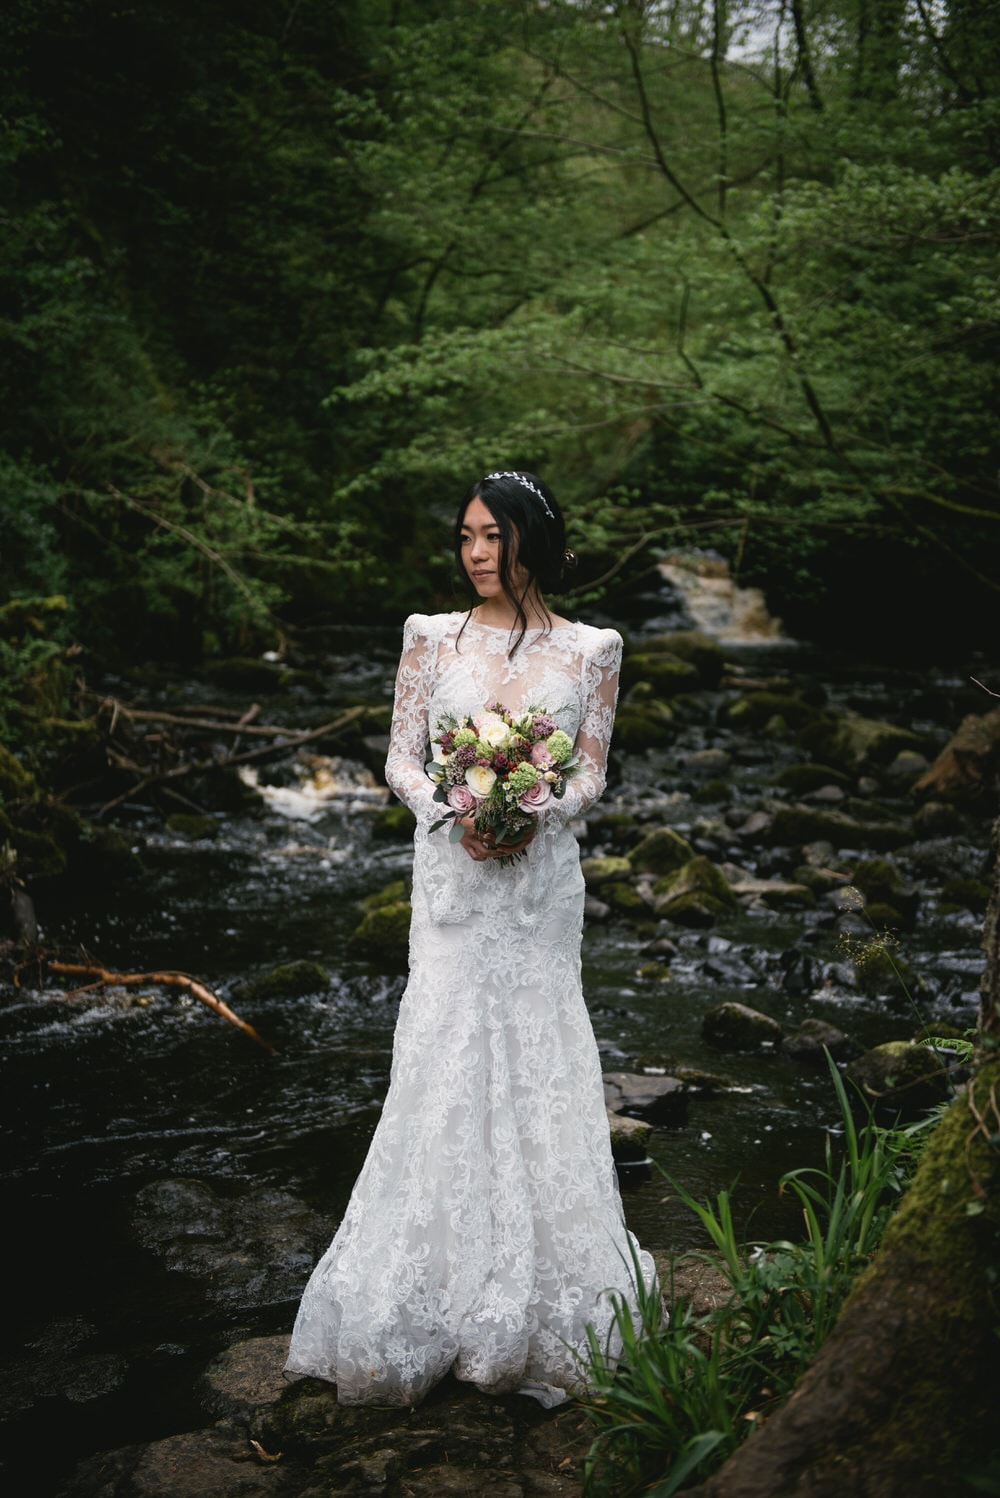 The bride's elegant bridal bouquet, featuring a mix of blooms and greenery during their Northern Ireland elopement.